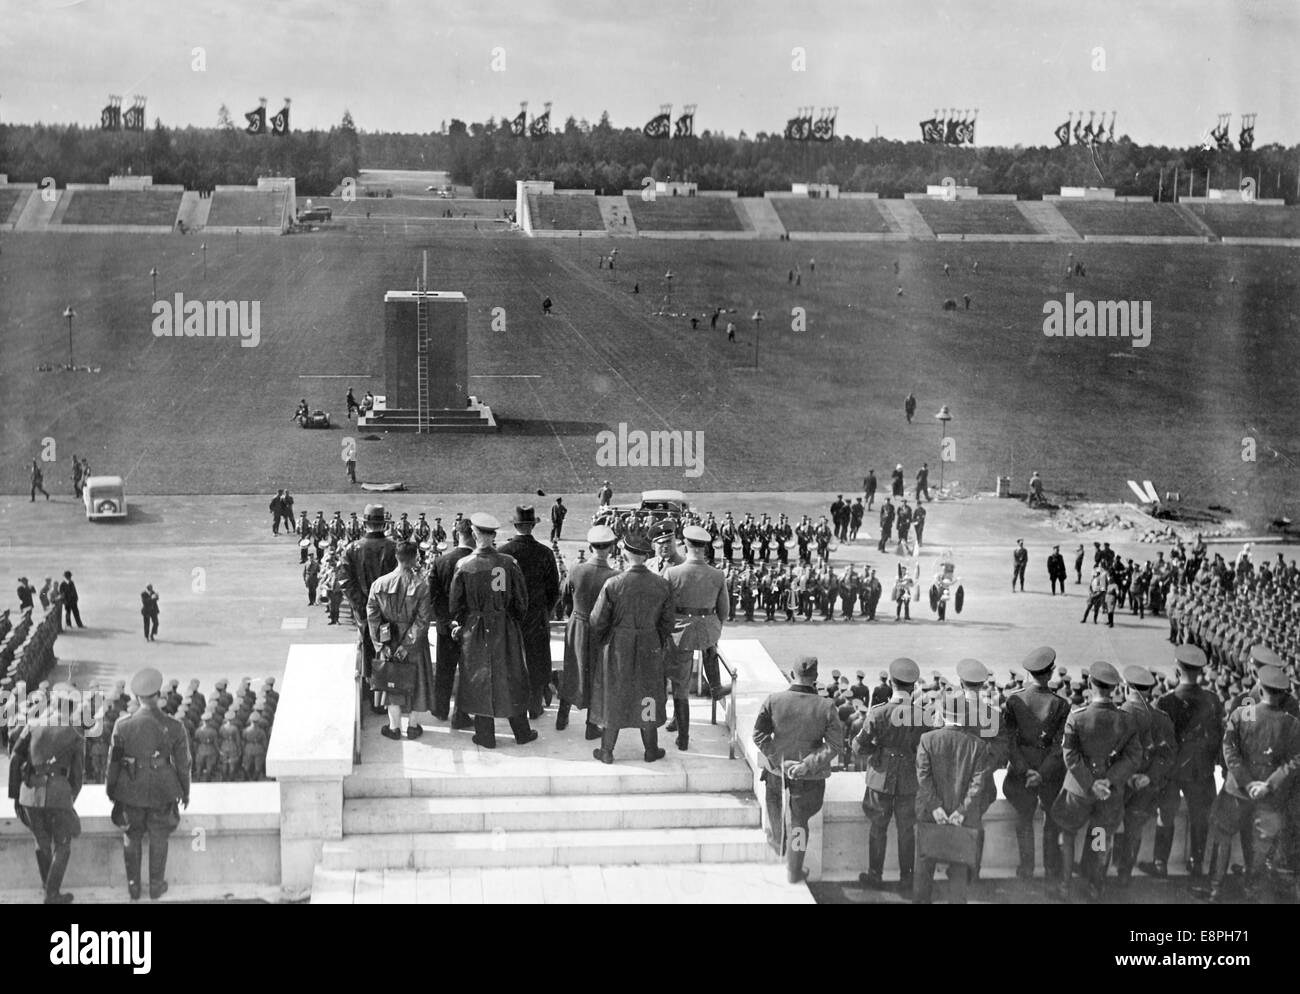 Nuremberg Rally 1936 in Nuremberg, Germany - Last rehearsal of the roll call of the P.O. ('Politische Organisation, lit. Political Organization) in the presence of Nazi politician Robert Ley (on the main stand) at zeppelin Gield at the Nazi party rally grounds on 08 September 1936 . (Flaws in quality due to the historic picture copy) Fotoarchiv für Zeitgeschichtee - NO WIRE SERVICE - Stock Photo